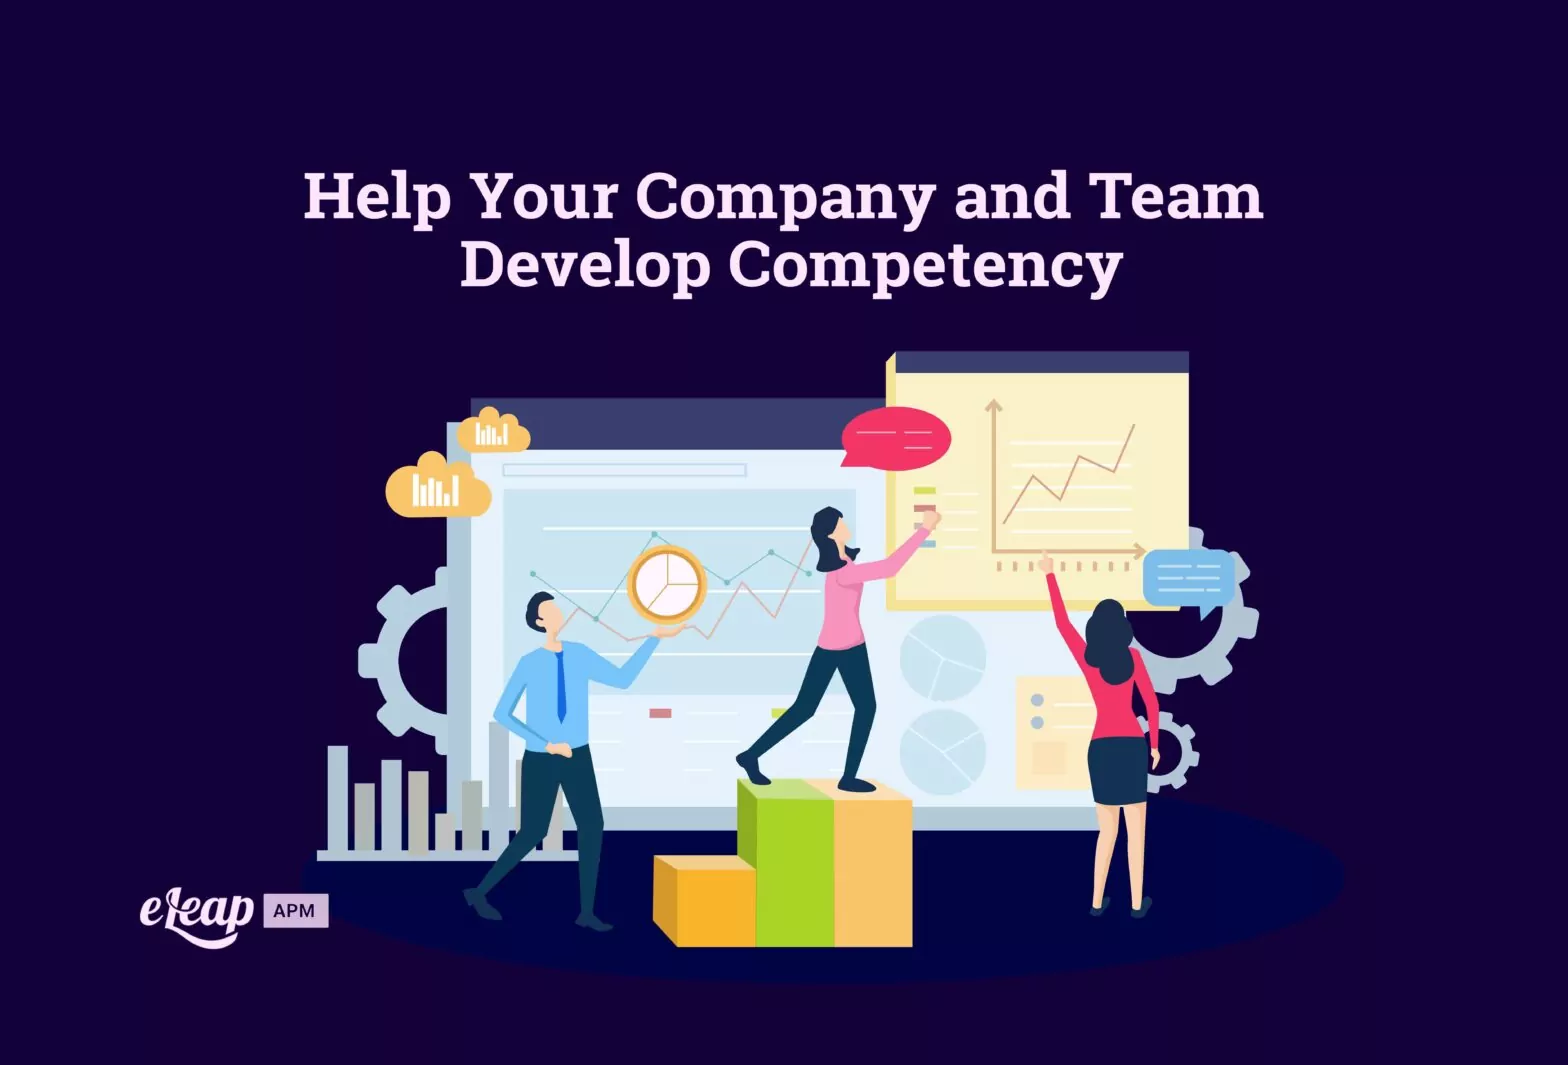 Help Your Company and Team Develop Competency